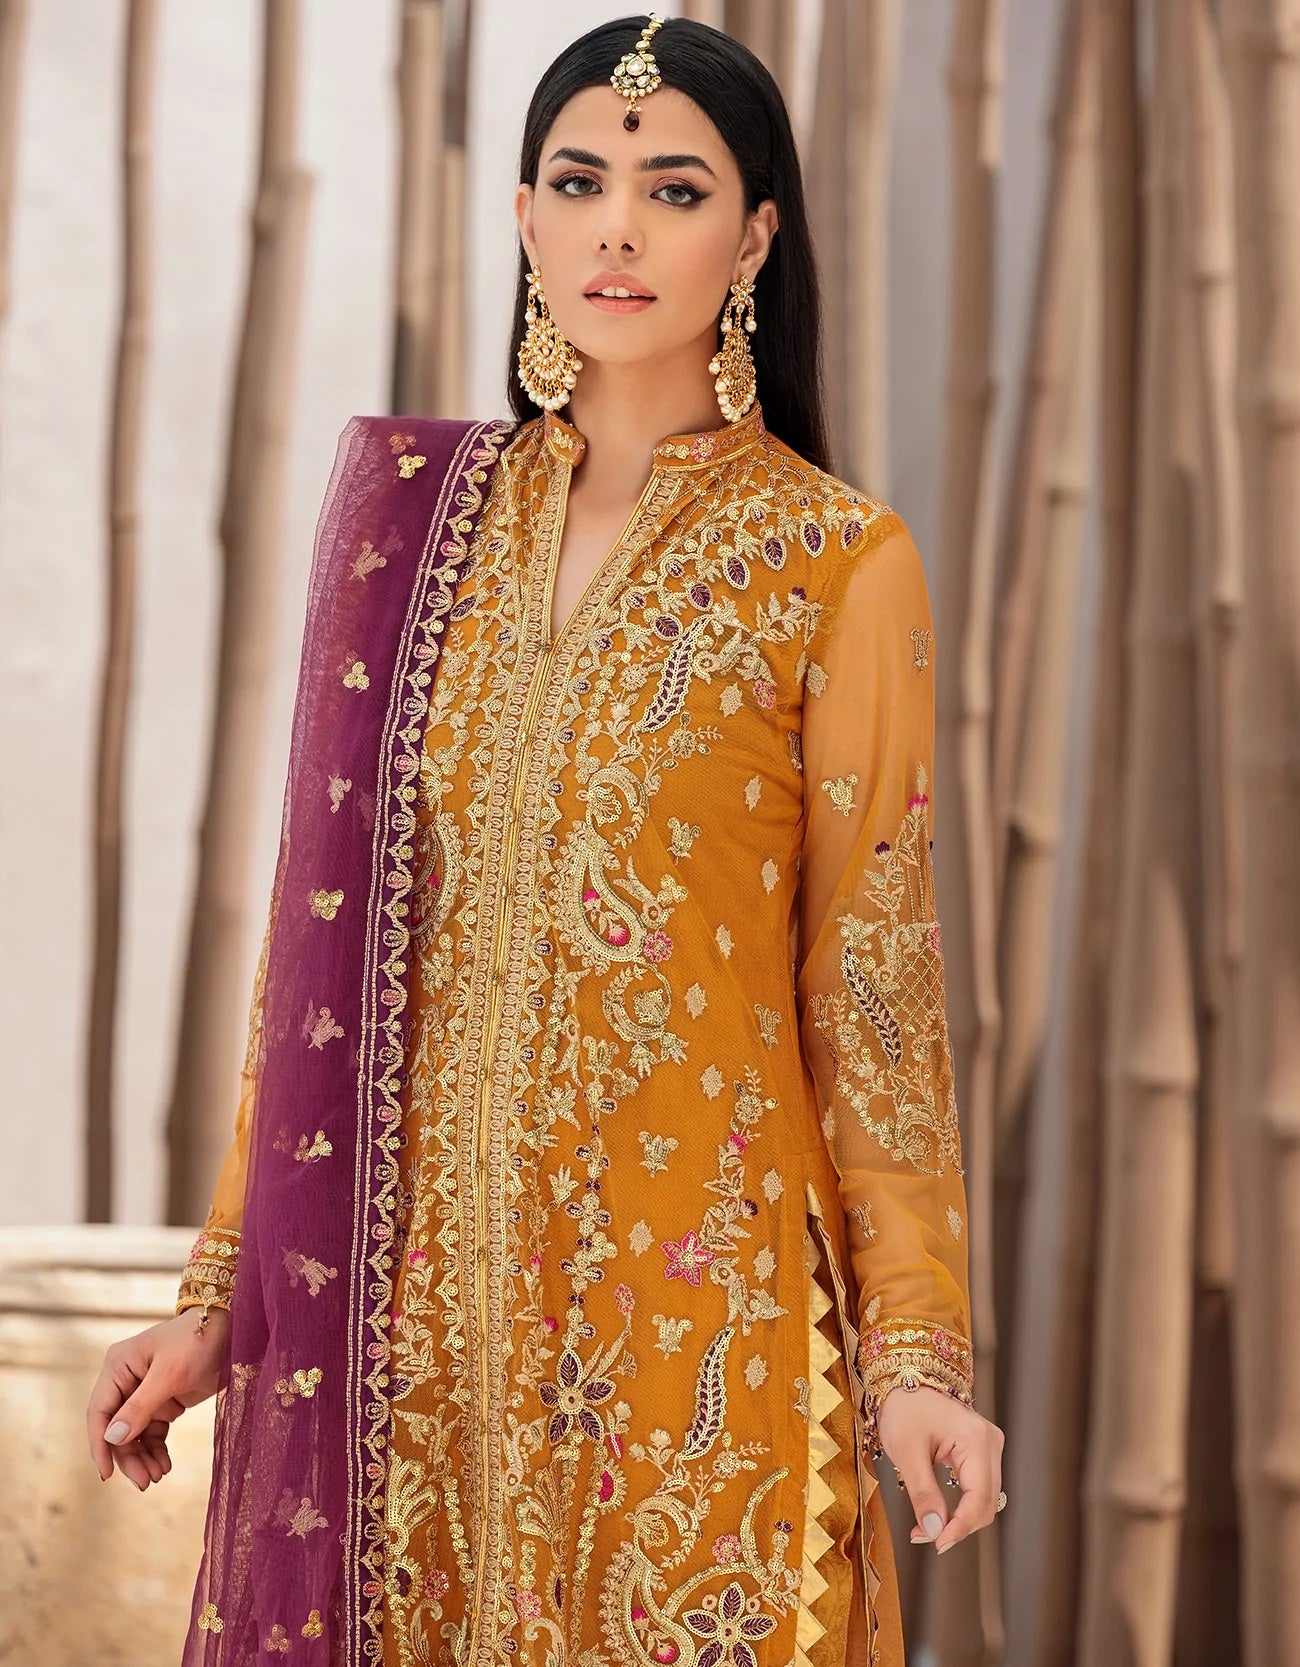 Nafasat By Emaan Adeel Embroidered Net Suits Unstitched 3 Piece NF-06